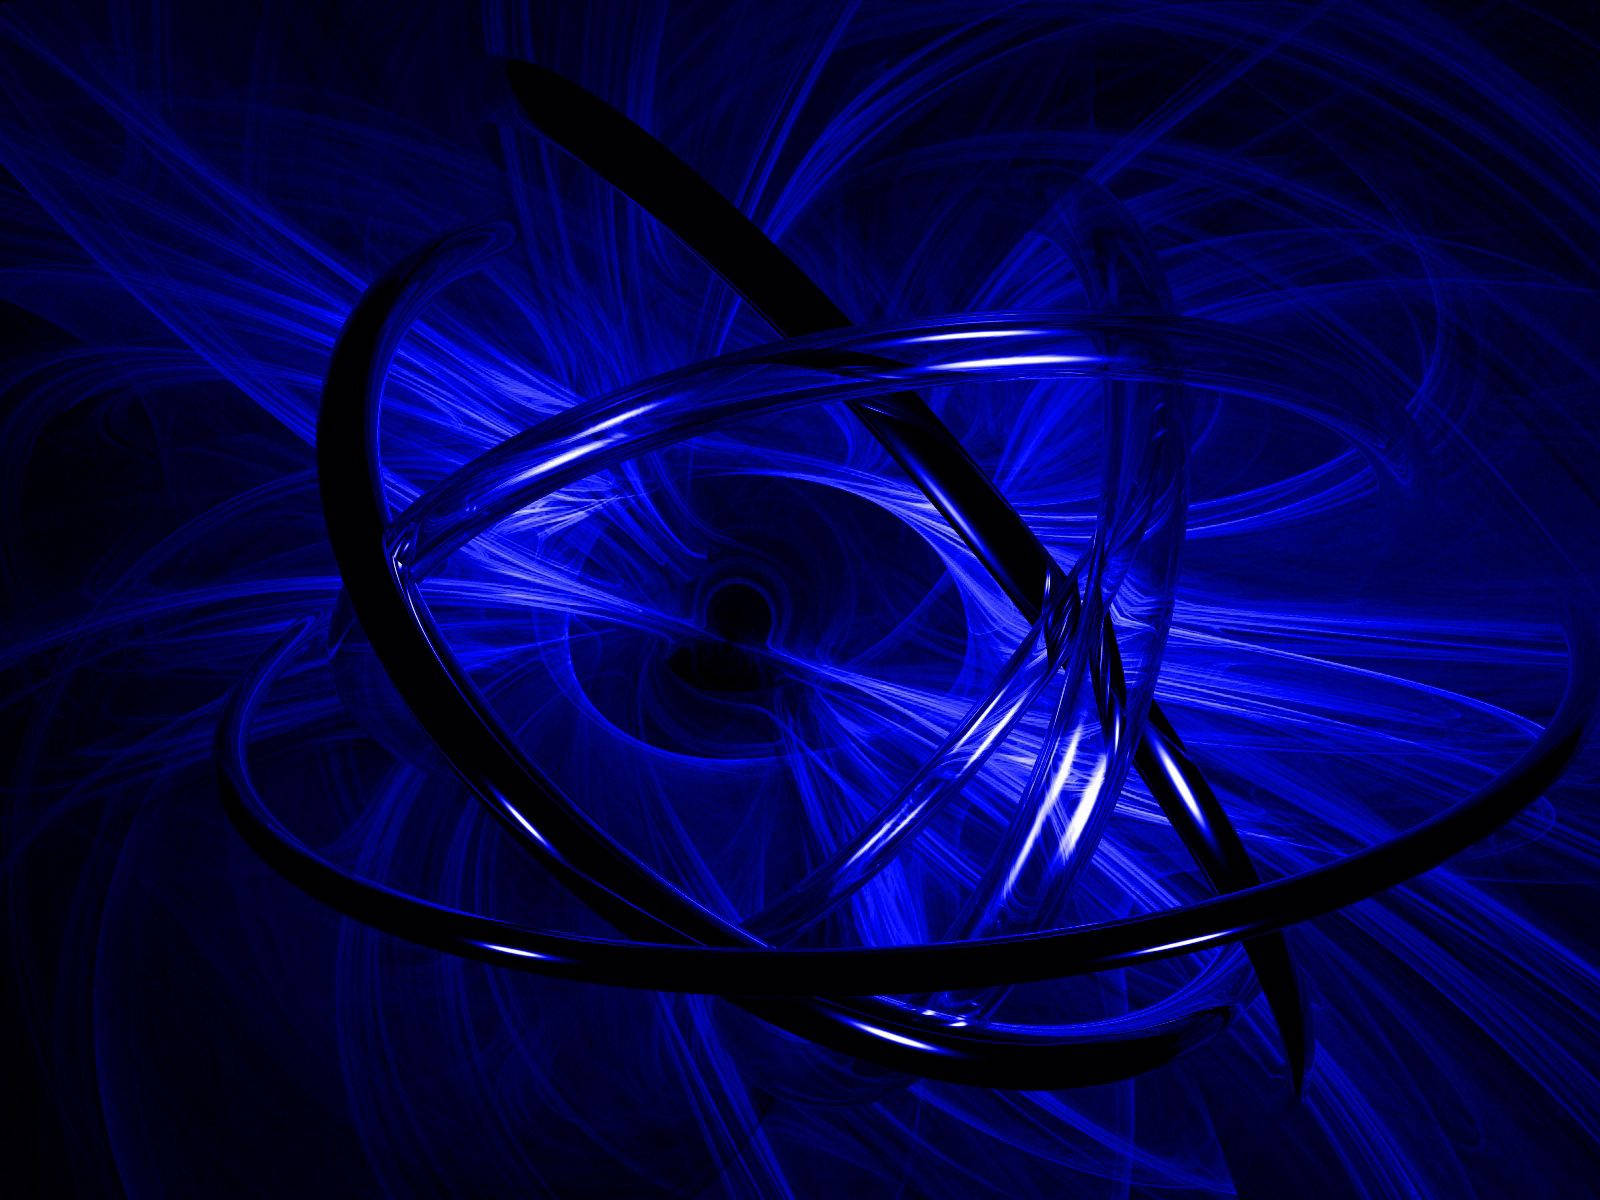 Blue Abstract Circles Background